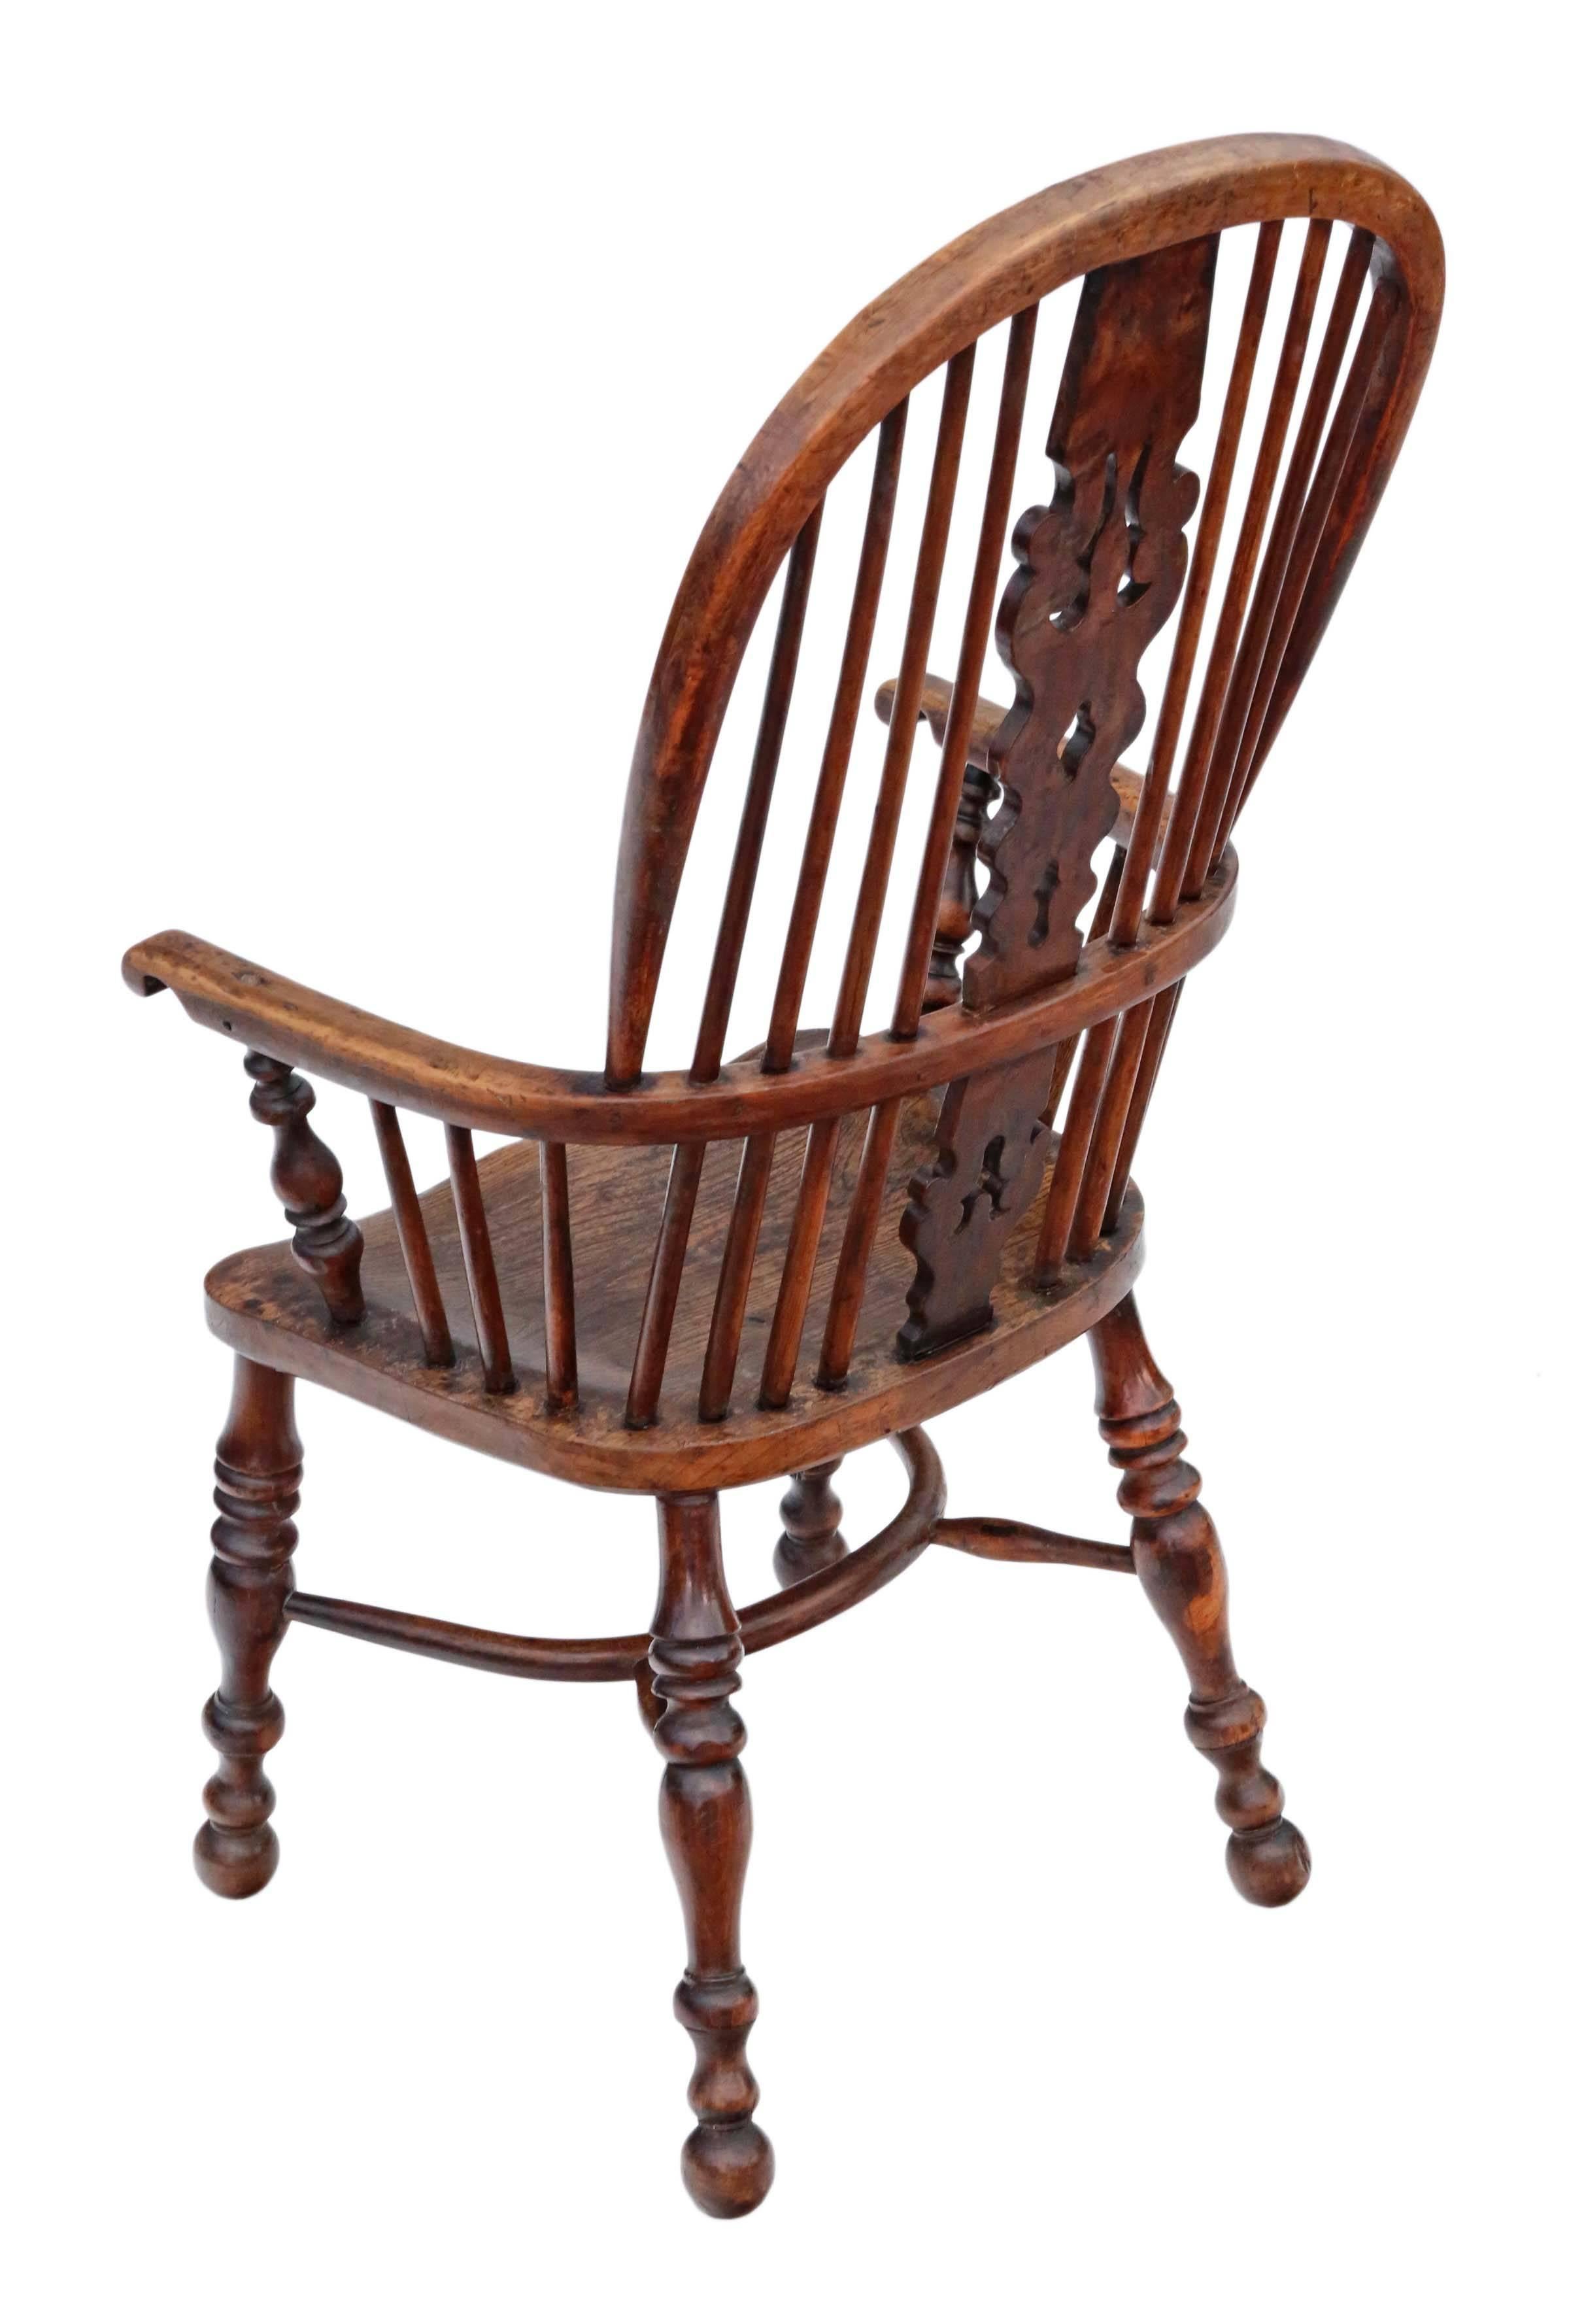 Antique Quality Victorian Yew & Elm Windsor Chair Armchair Dining, circa 1840 In Good Condition For Sale In Wisbech, Walton Wisbech